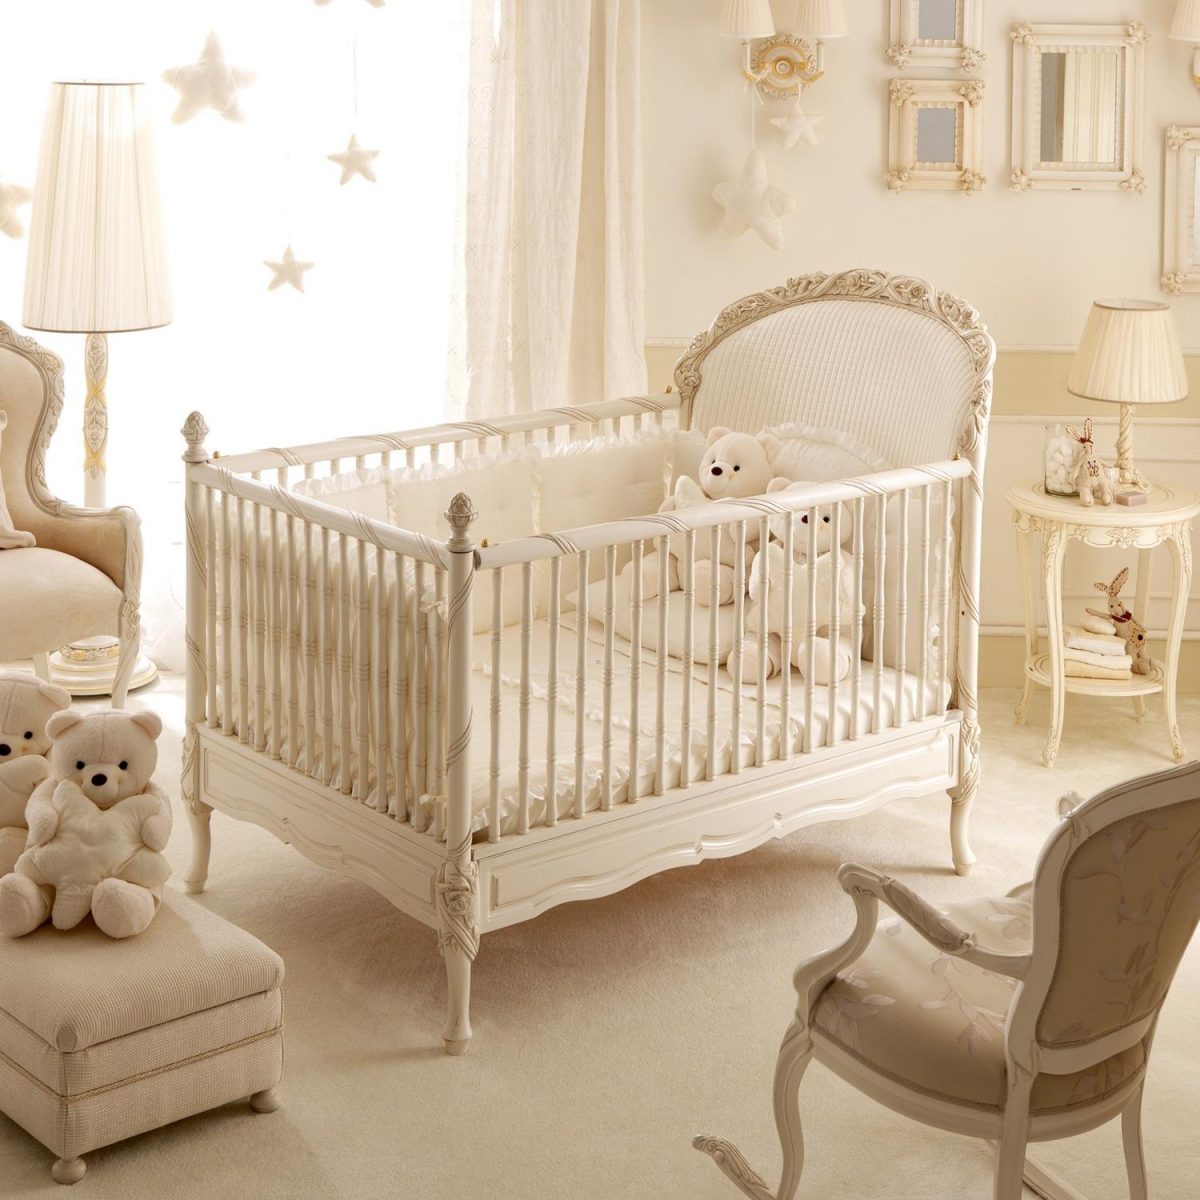 How to decorate babies and moms heaven | Interior Design Paradise